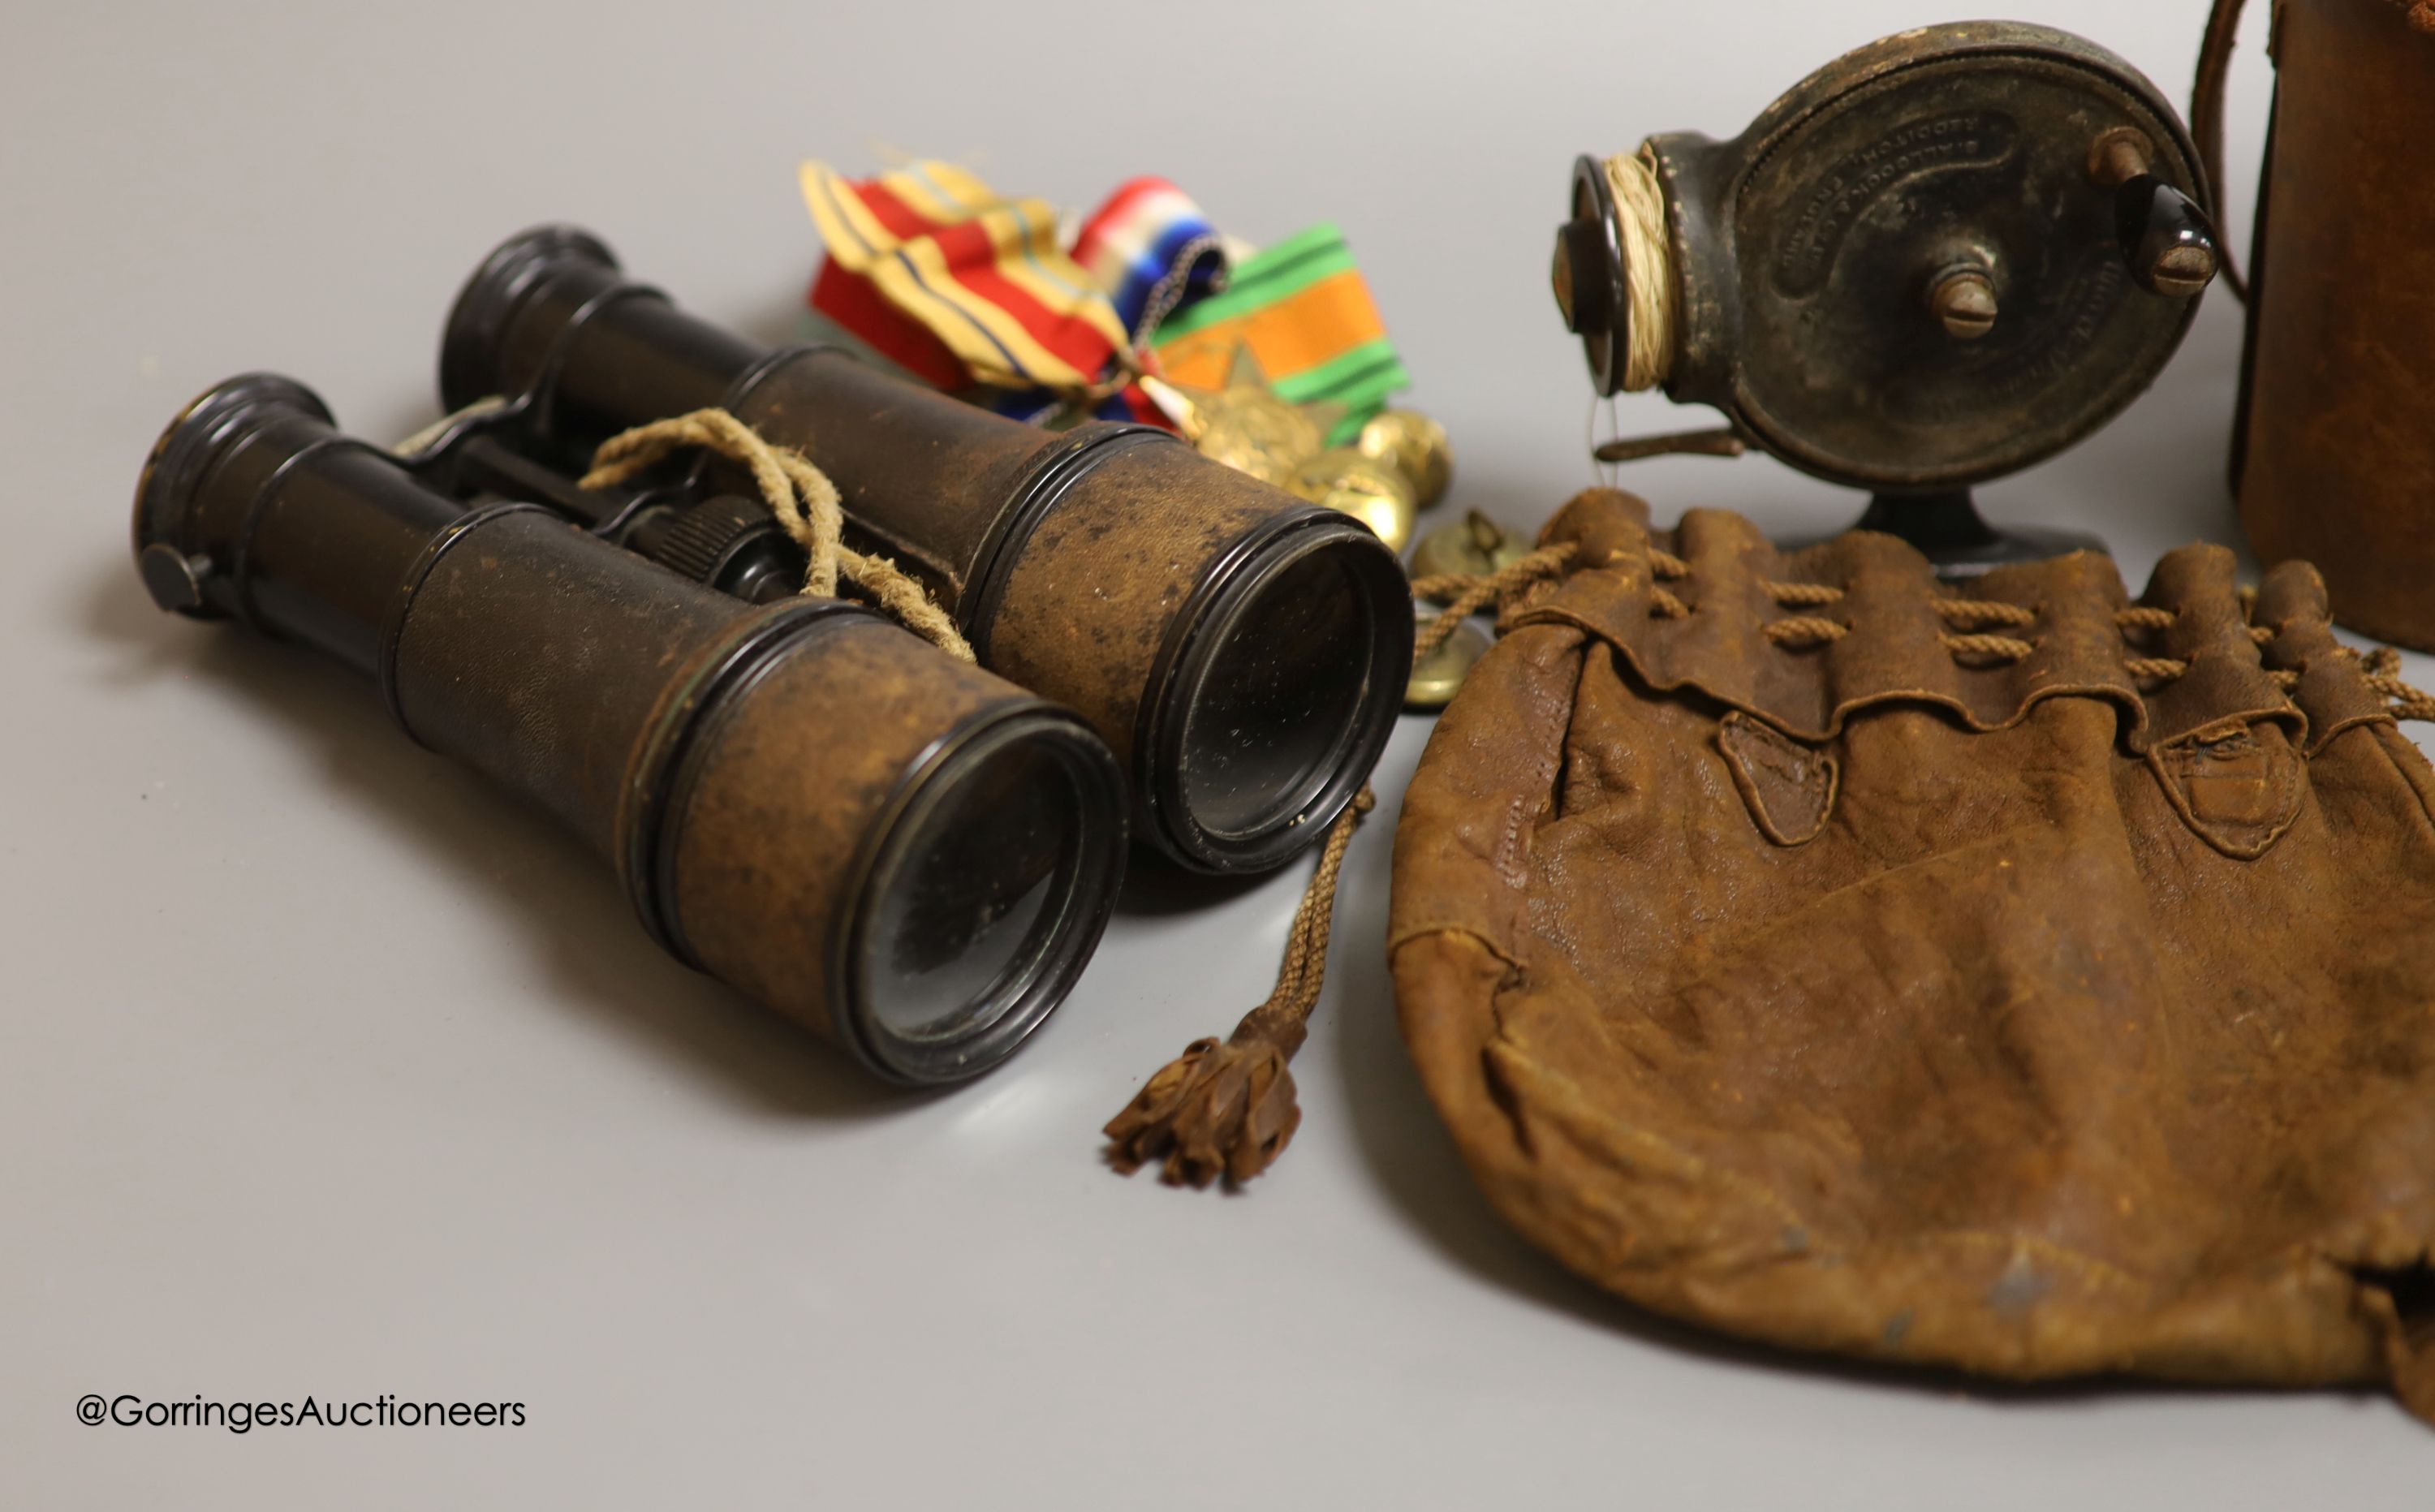 A leather cased flask and cups, various WWI and WWII medals, binoculars and a fishing reel